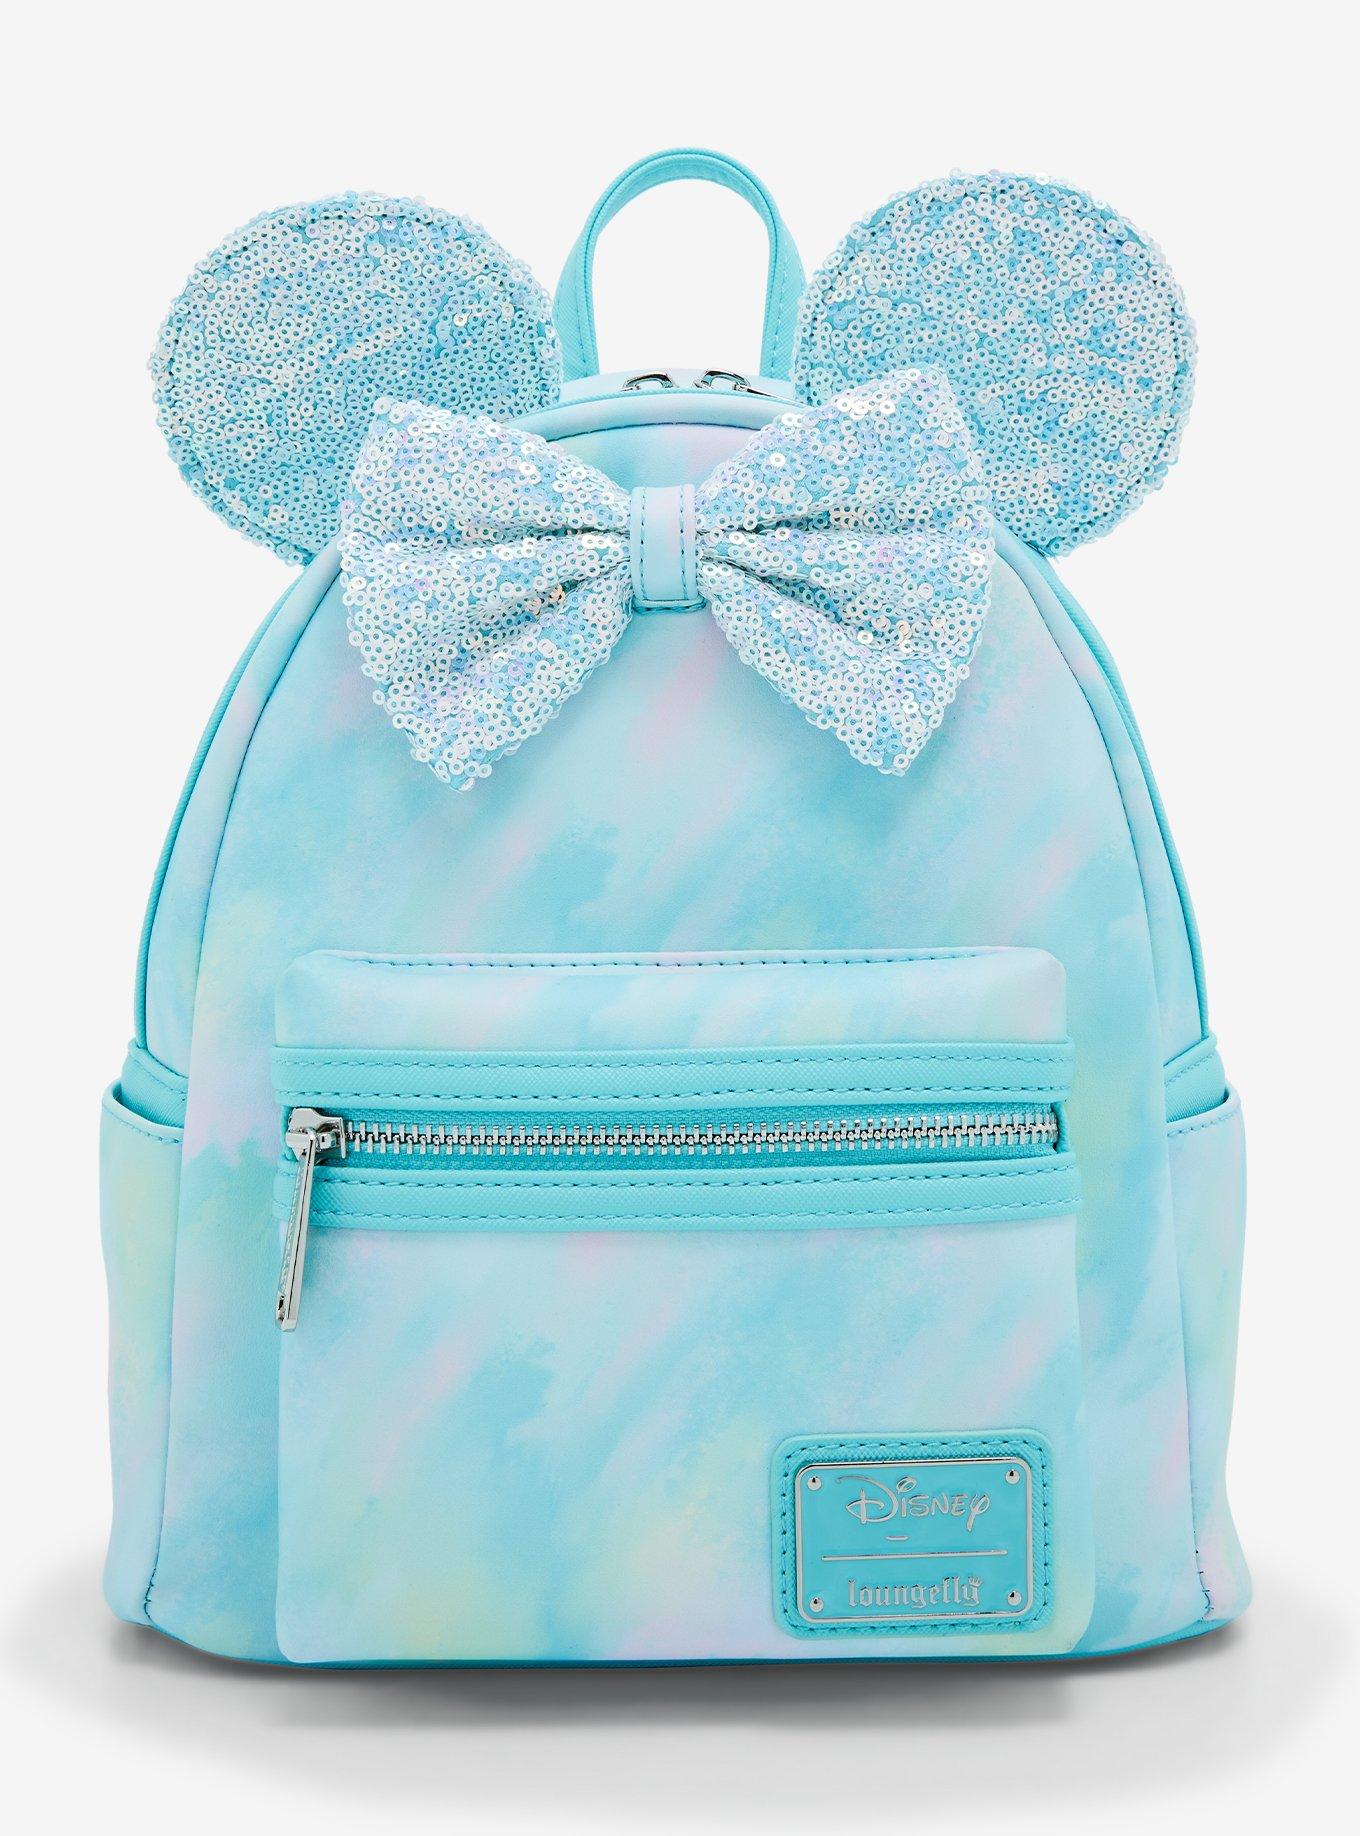 Loungefly Disney Blue Sequin Cinderella Castle Snow Globe Mini Backpack, Women's, Size: One Size